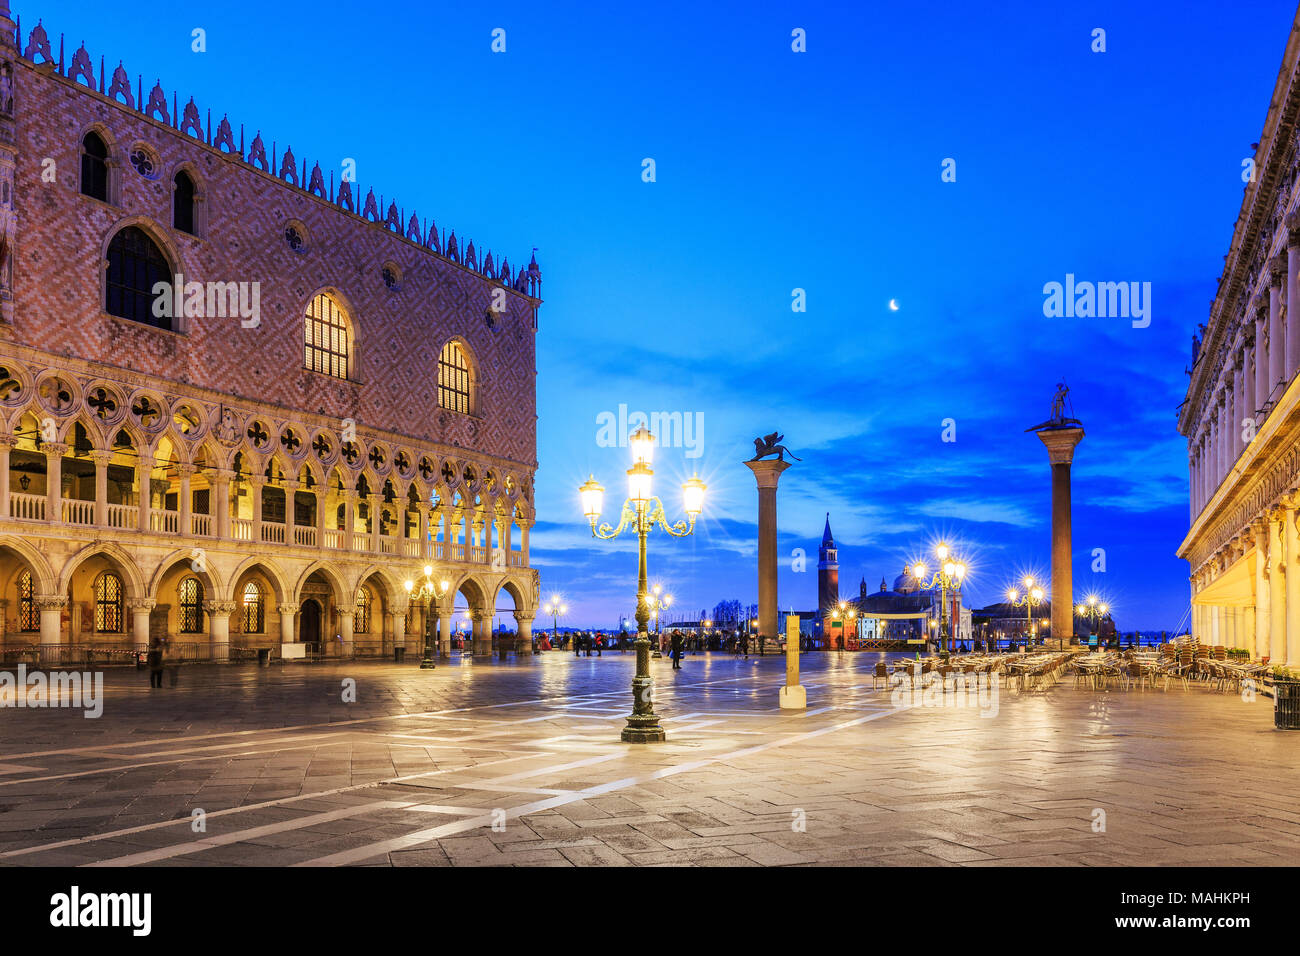 Venice, Italy. St Mark's Square and Doge's Palace before sunrise. Stock Photo